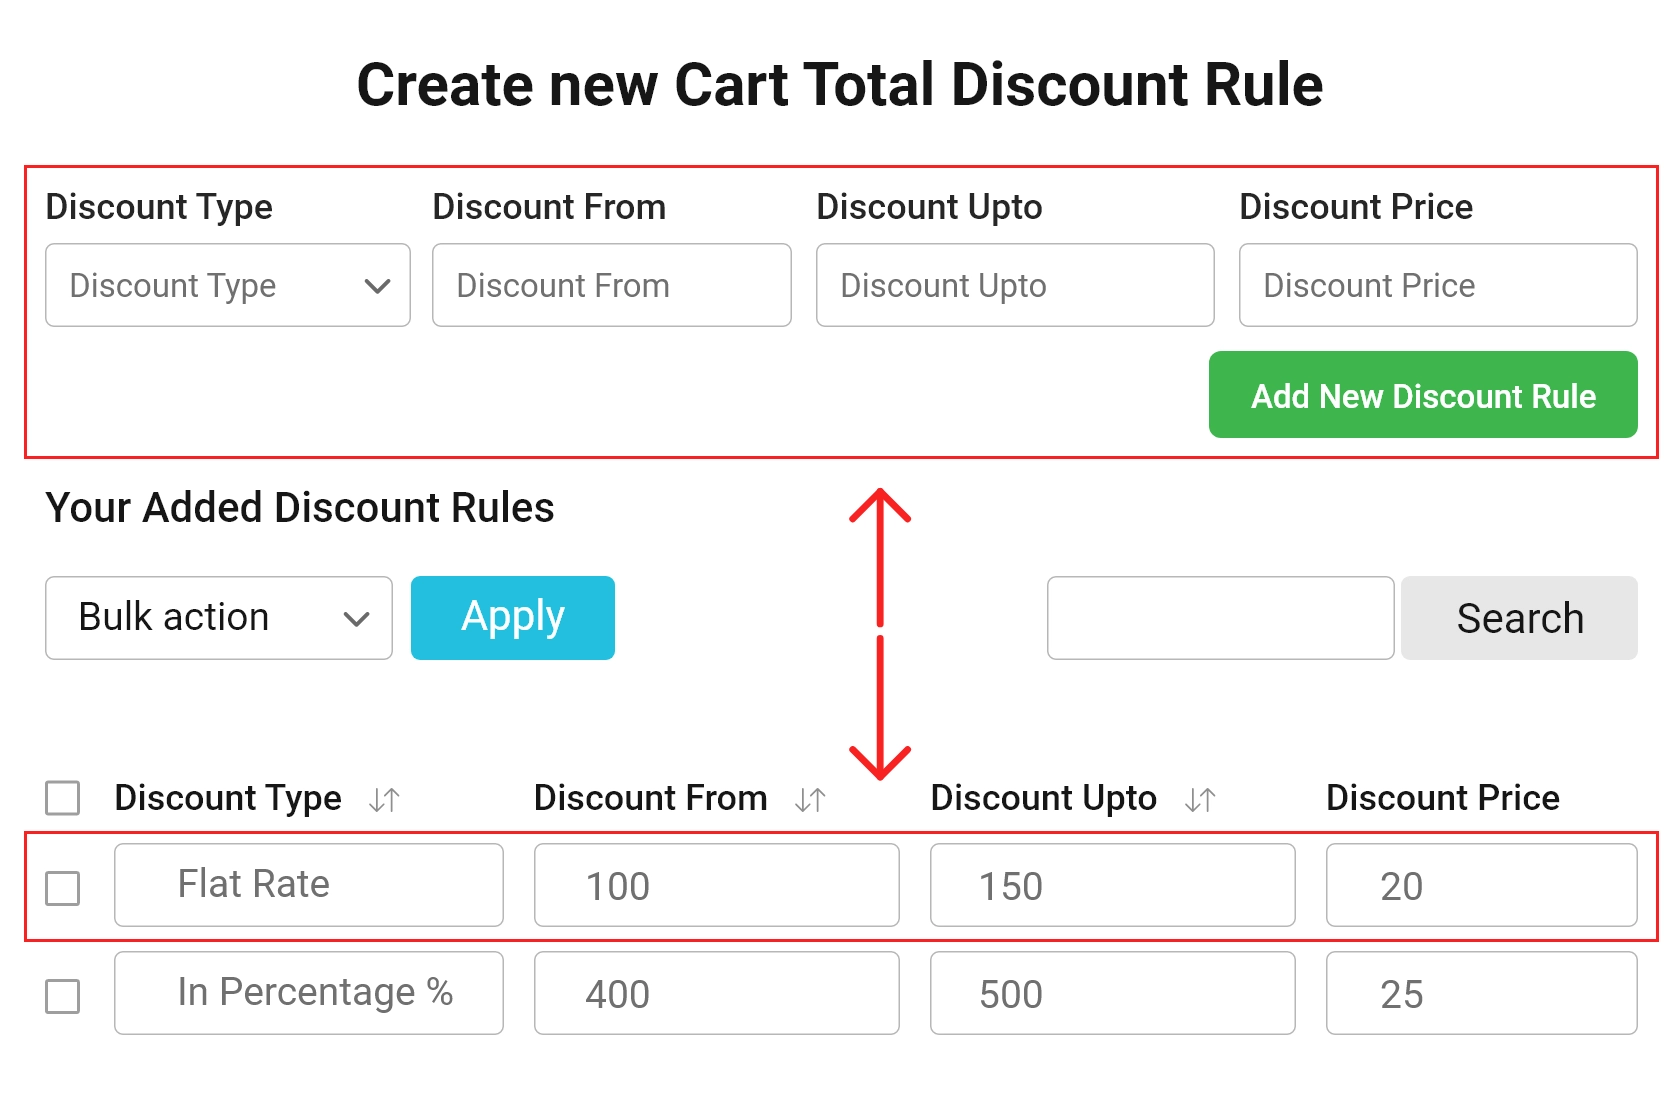 Admin can edit or modify discount rules in a single page: